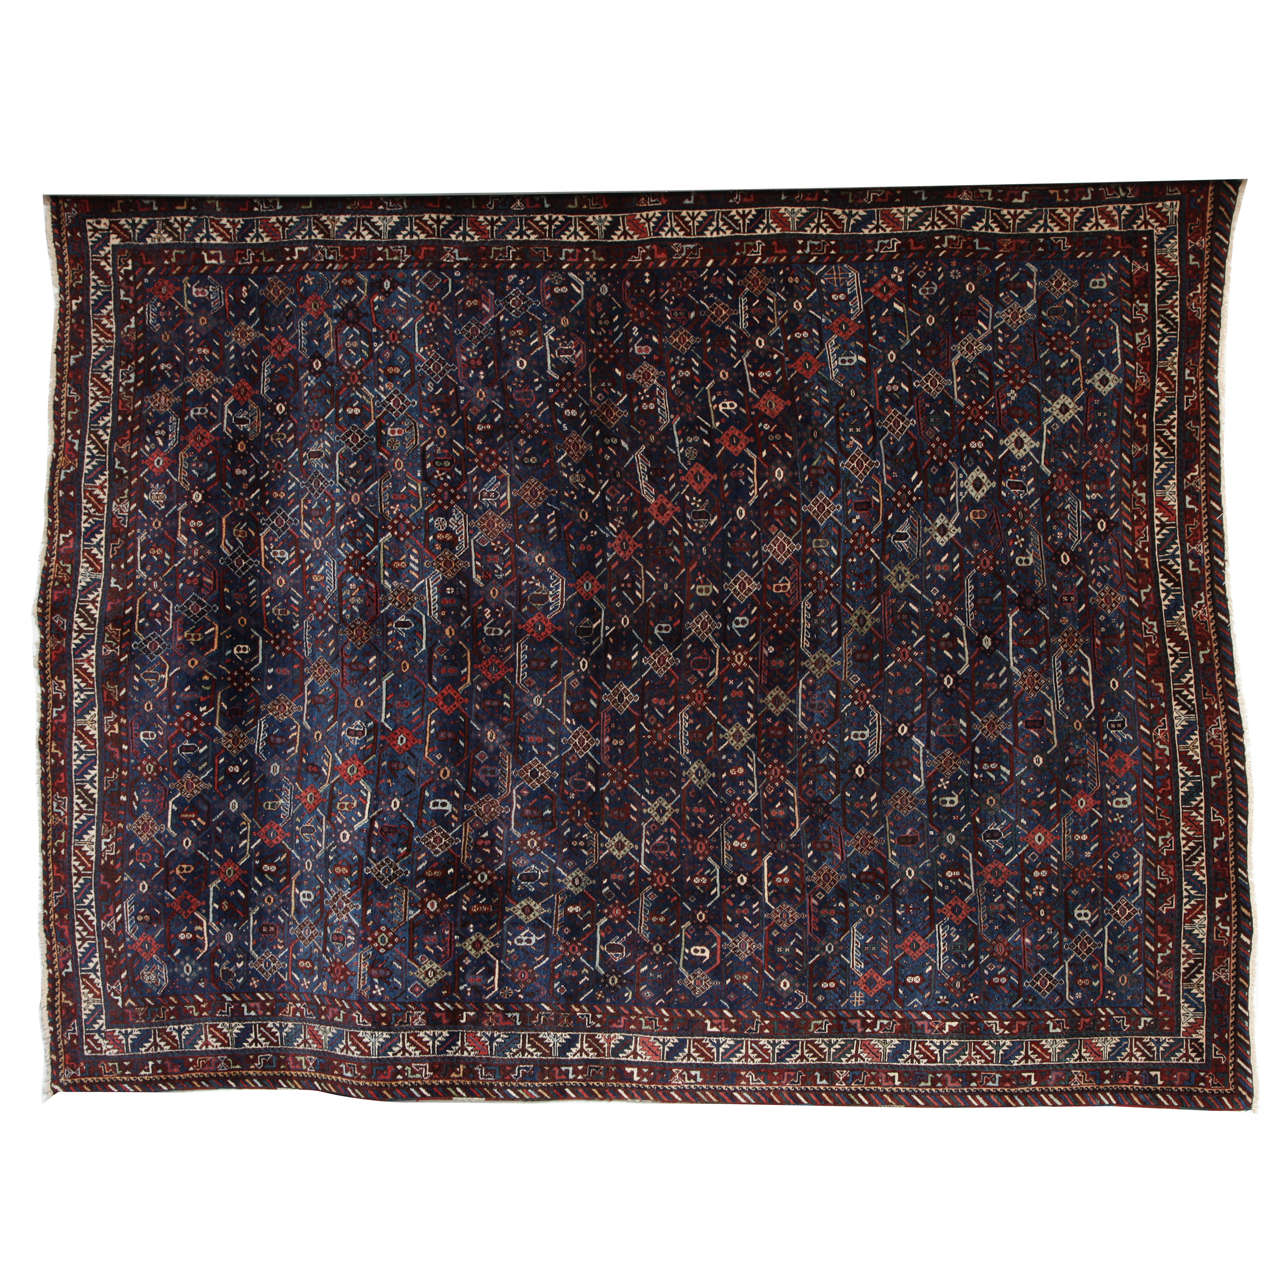 Antique 1880s Persian Qashqai Rug, Wool, Hand-knotted, 7' x 9' For Sale